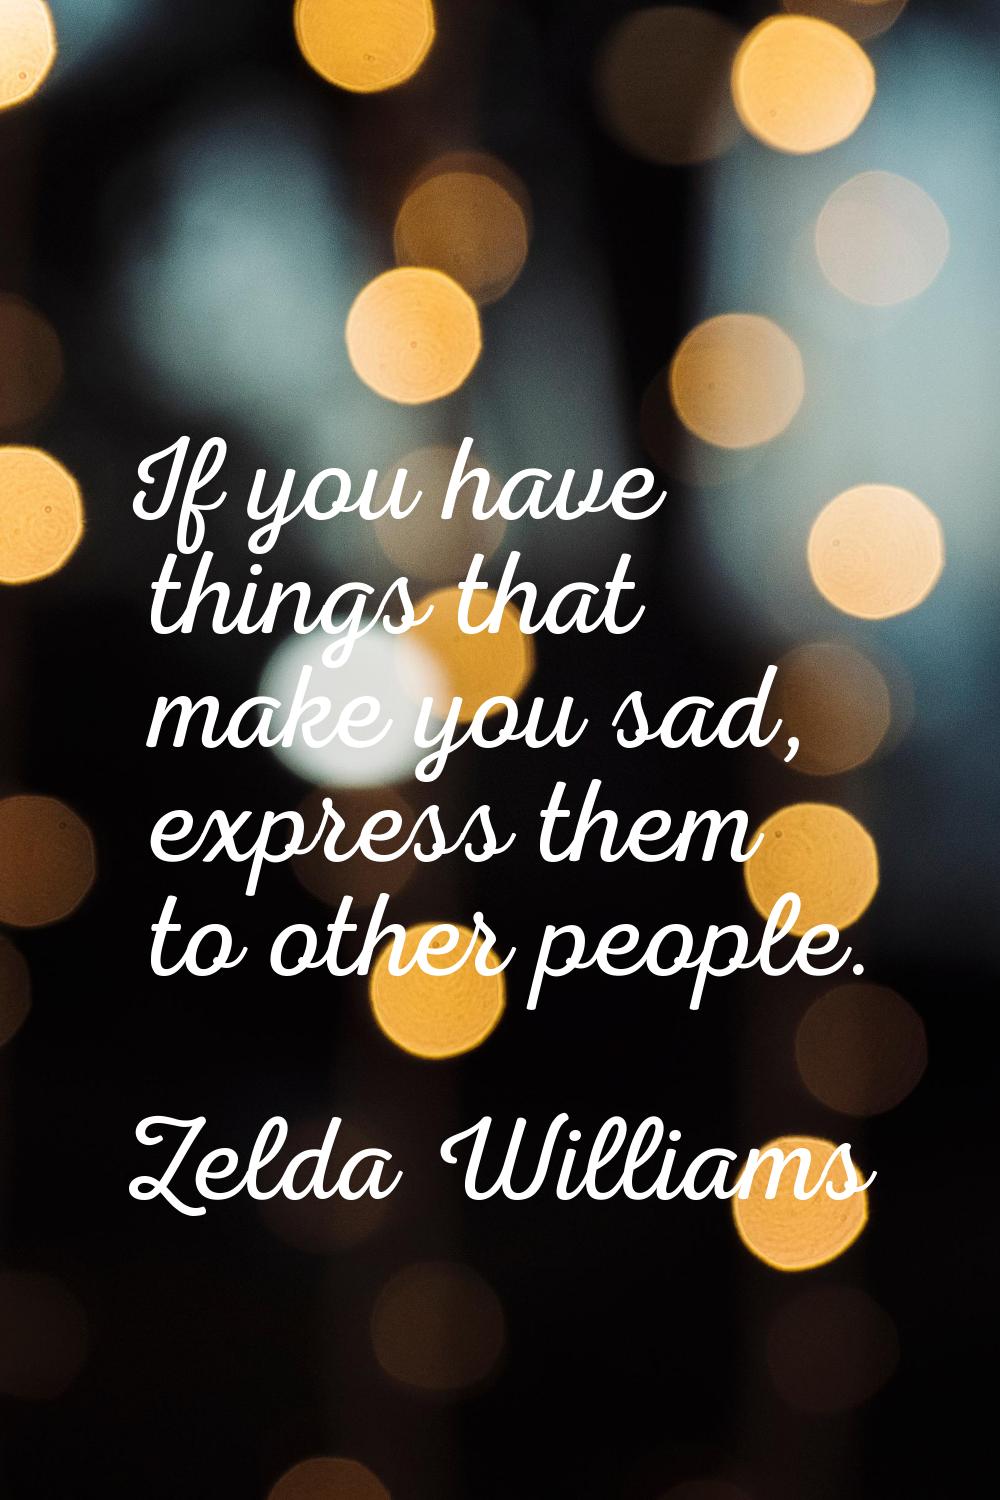 If you have things that make you sad, express them to other people.